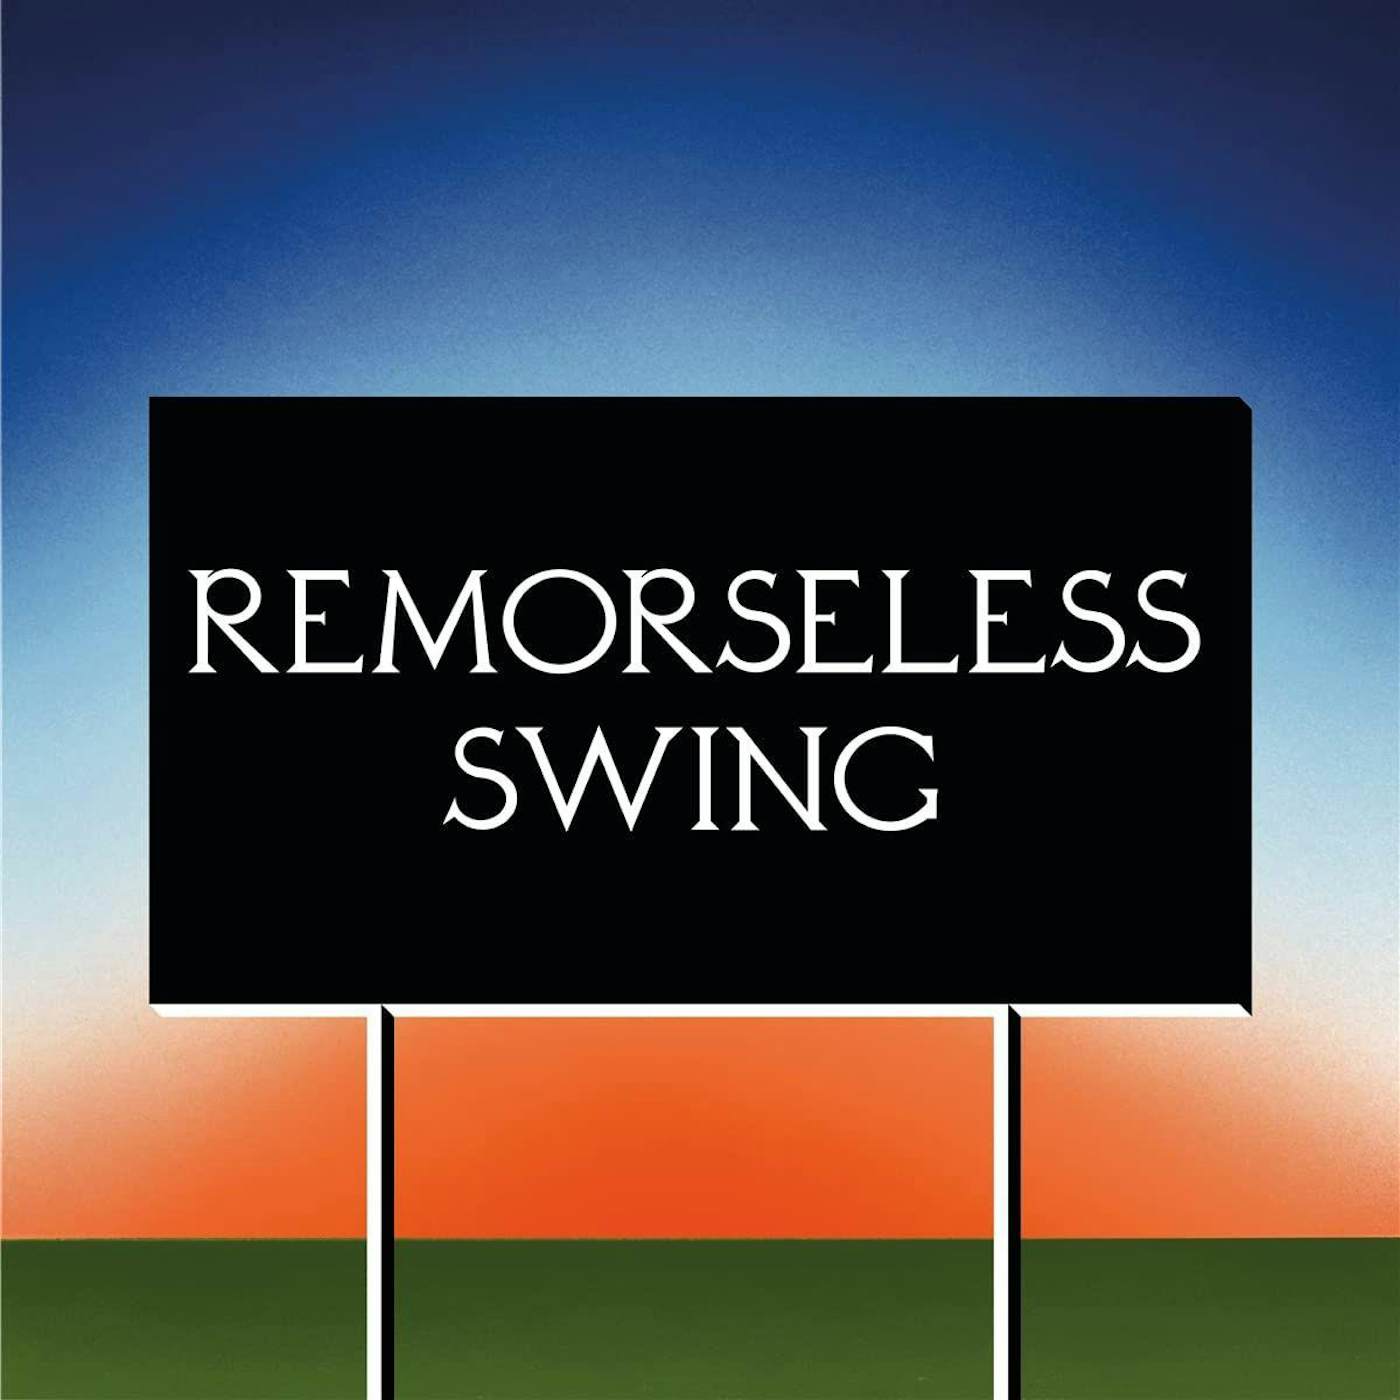 Don't Worry Remorseless Swing (Green) Vinyl Record 